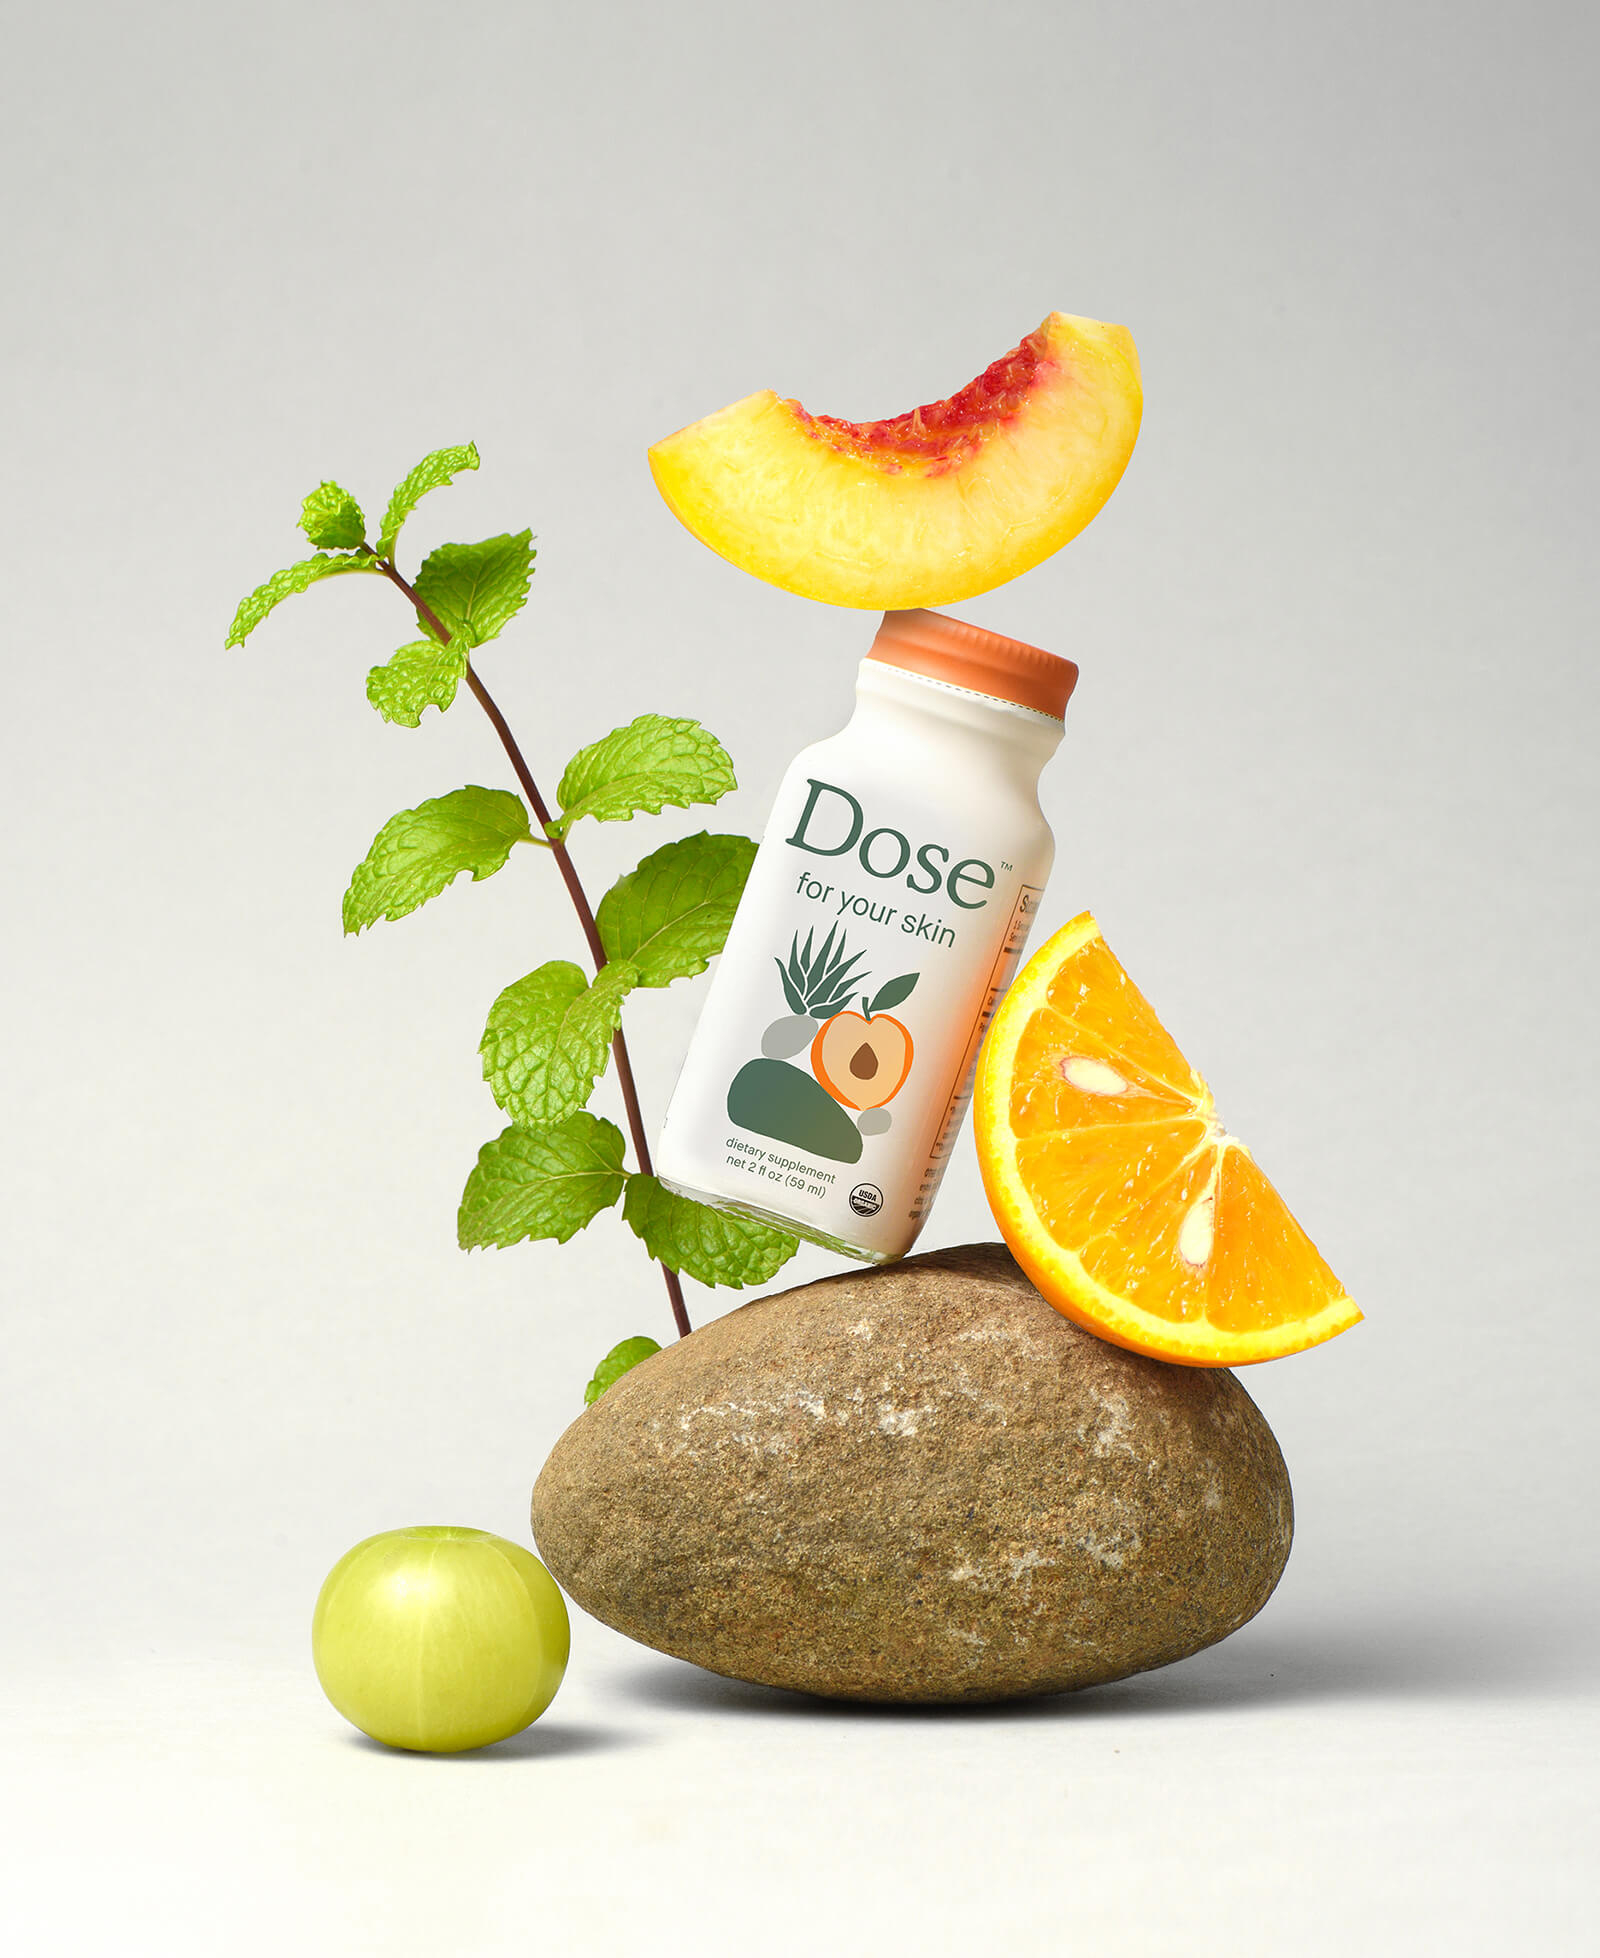 Dose Product Photography